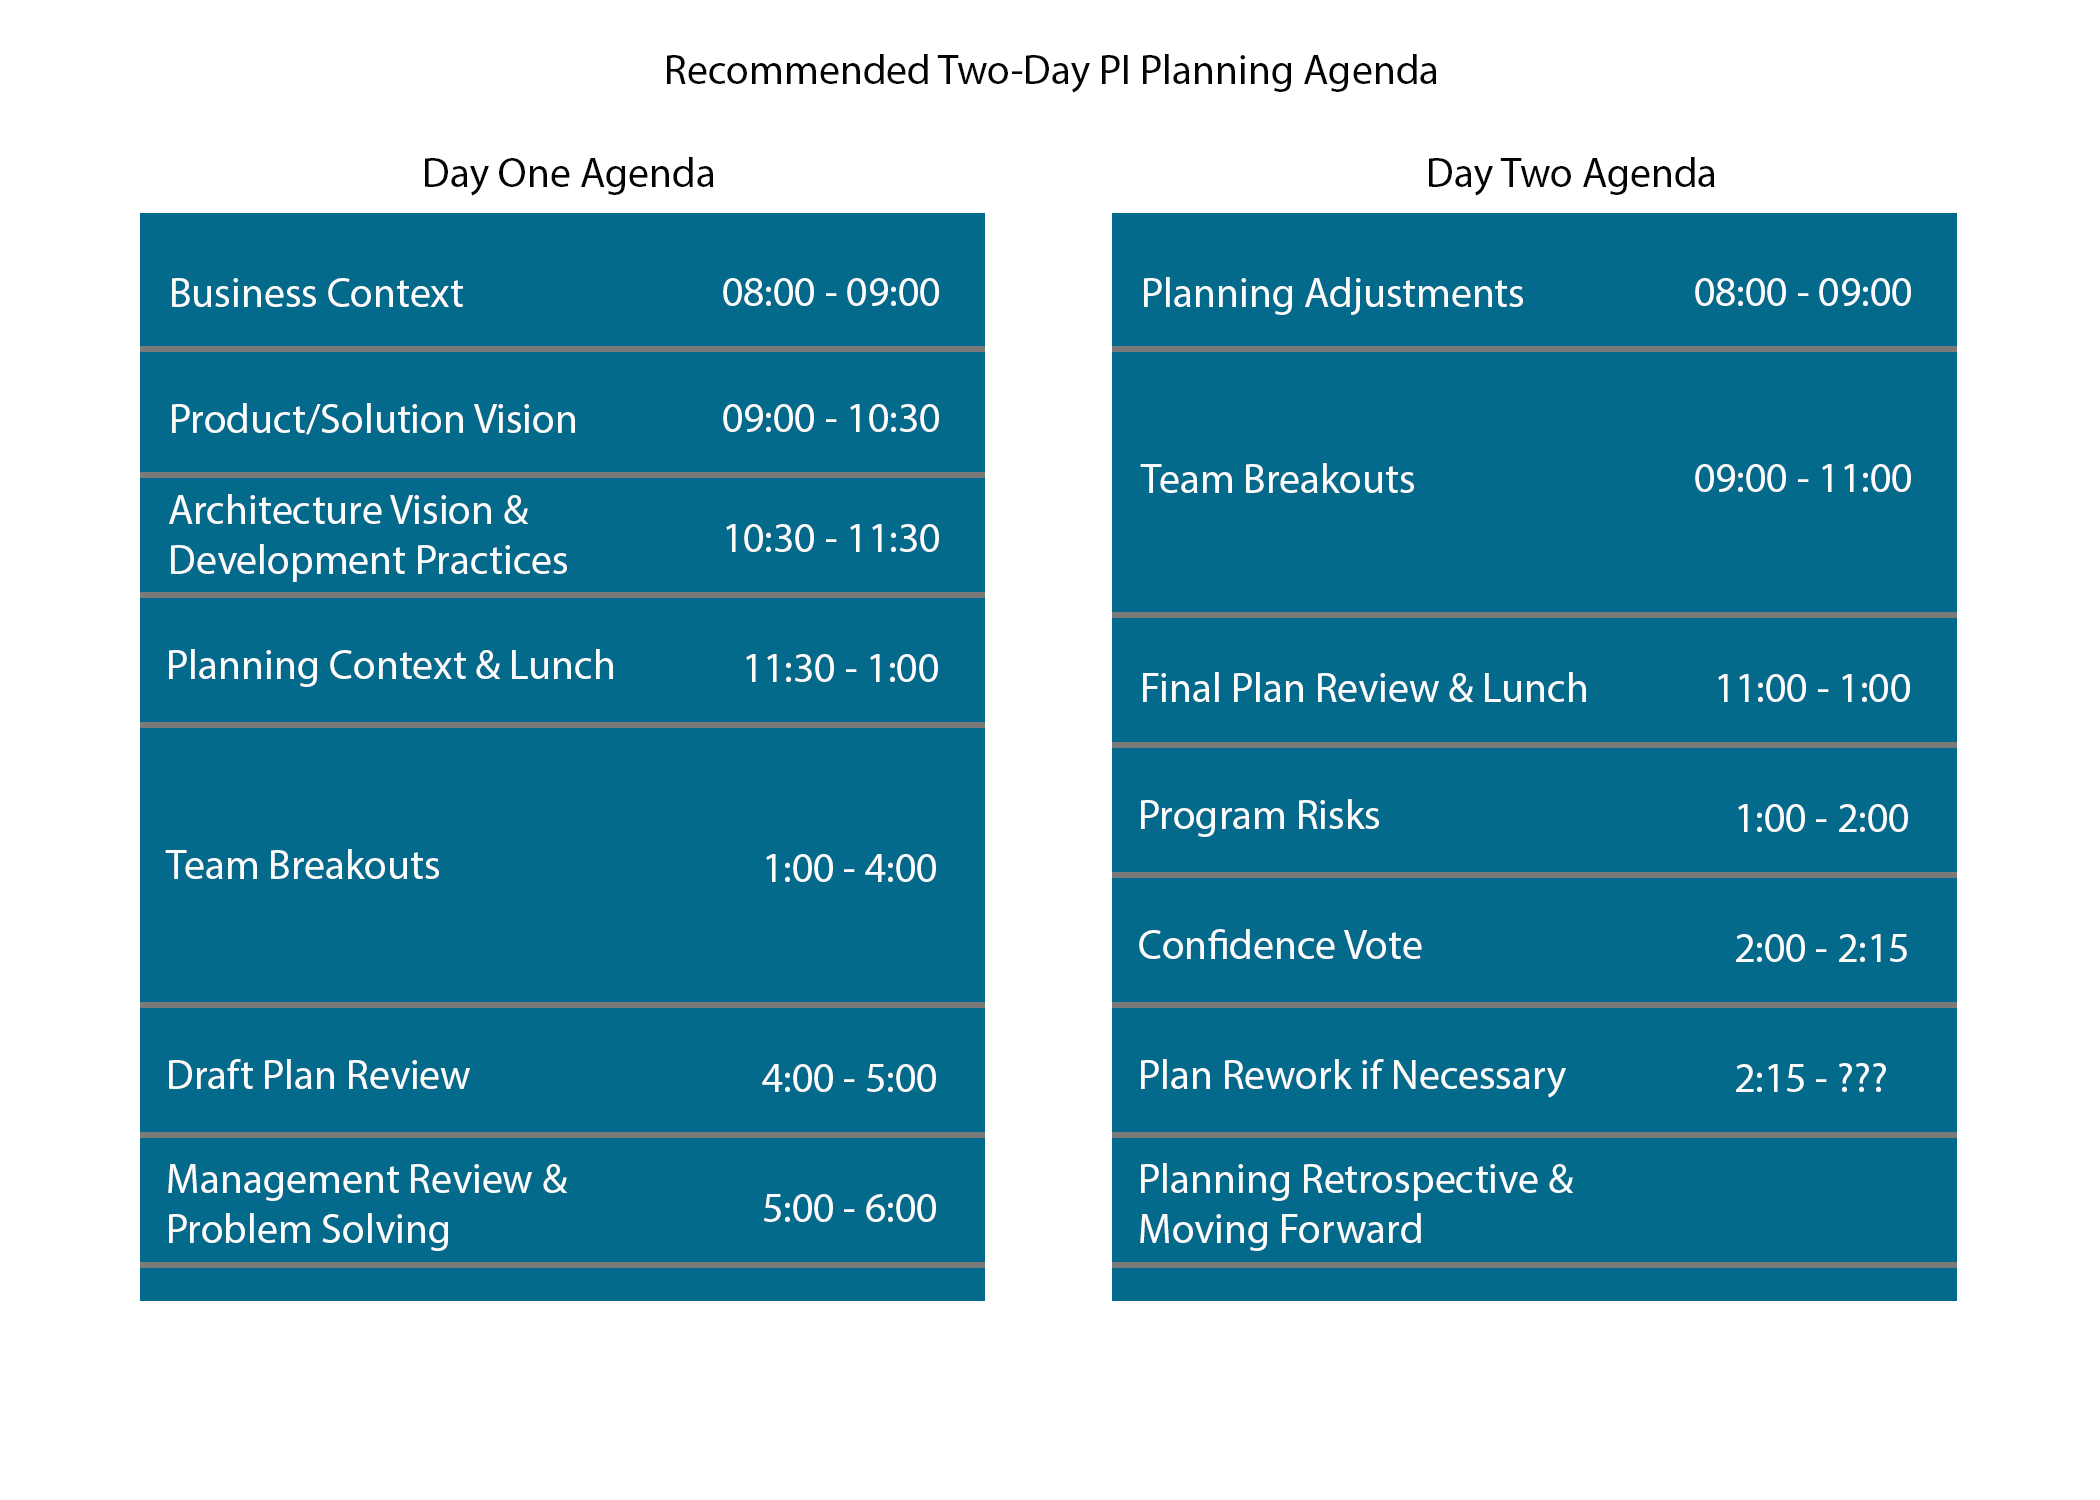 Recommended Two-Day PI Planning Agenda